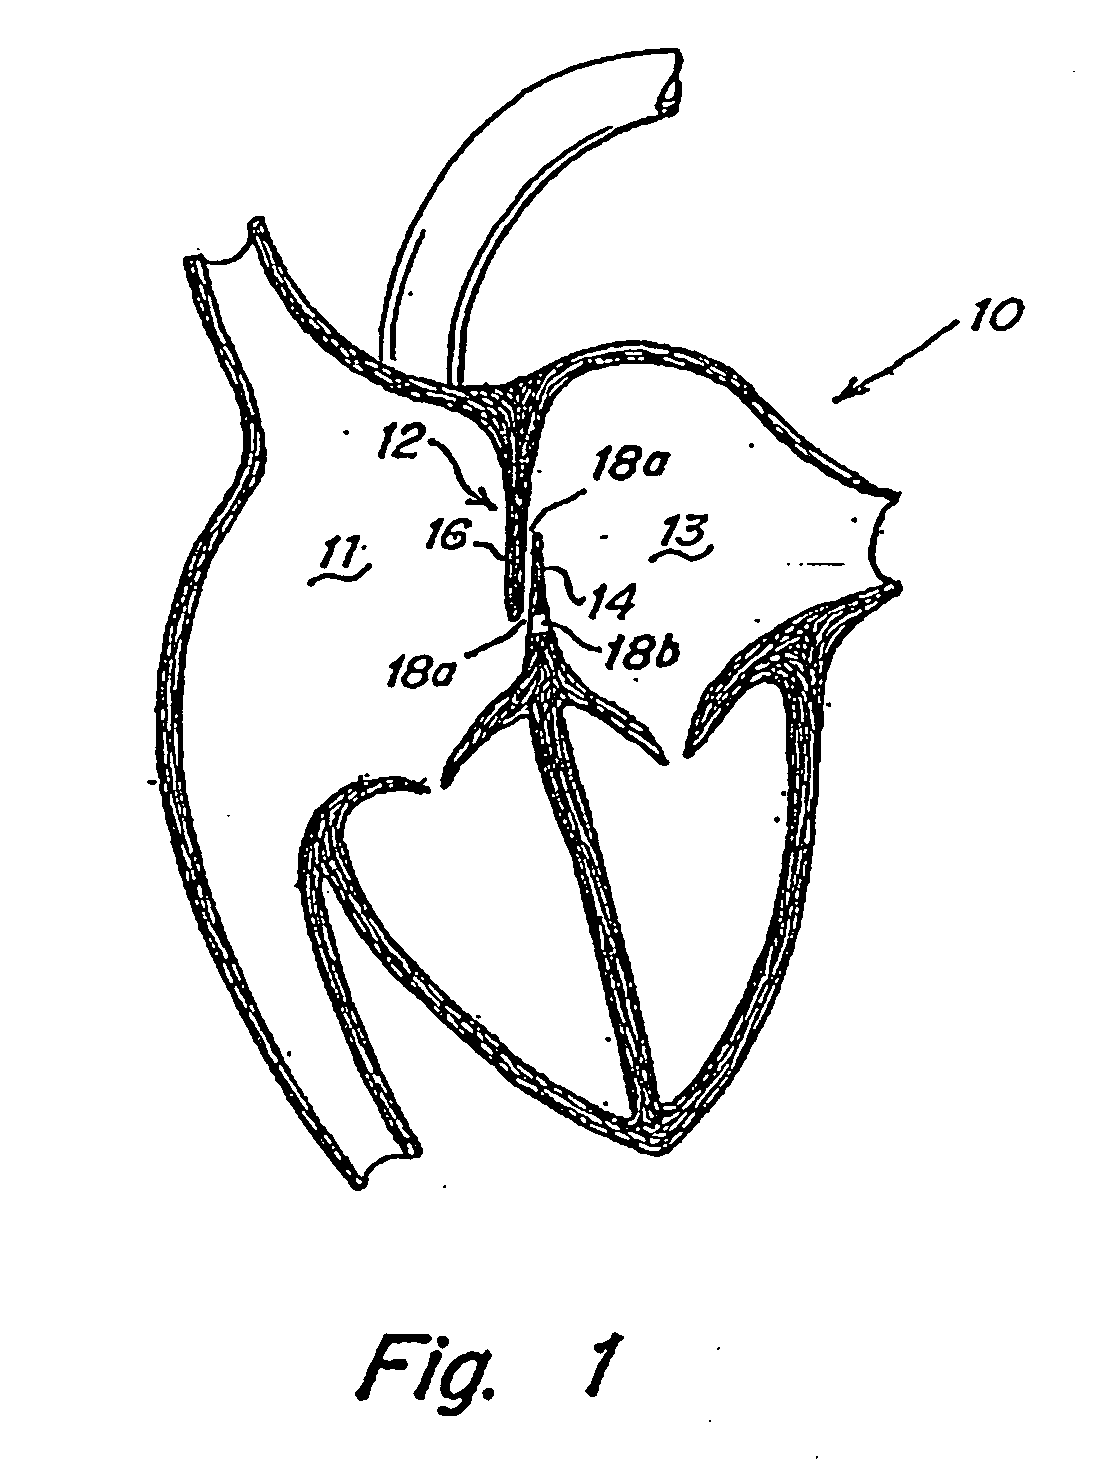 Catch system with locking cap for patent foramen ovale (PFO) occluder